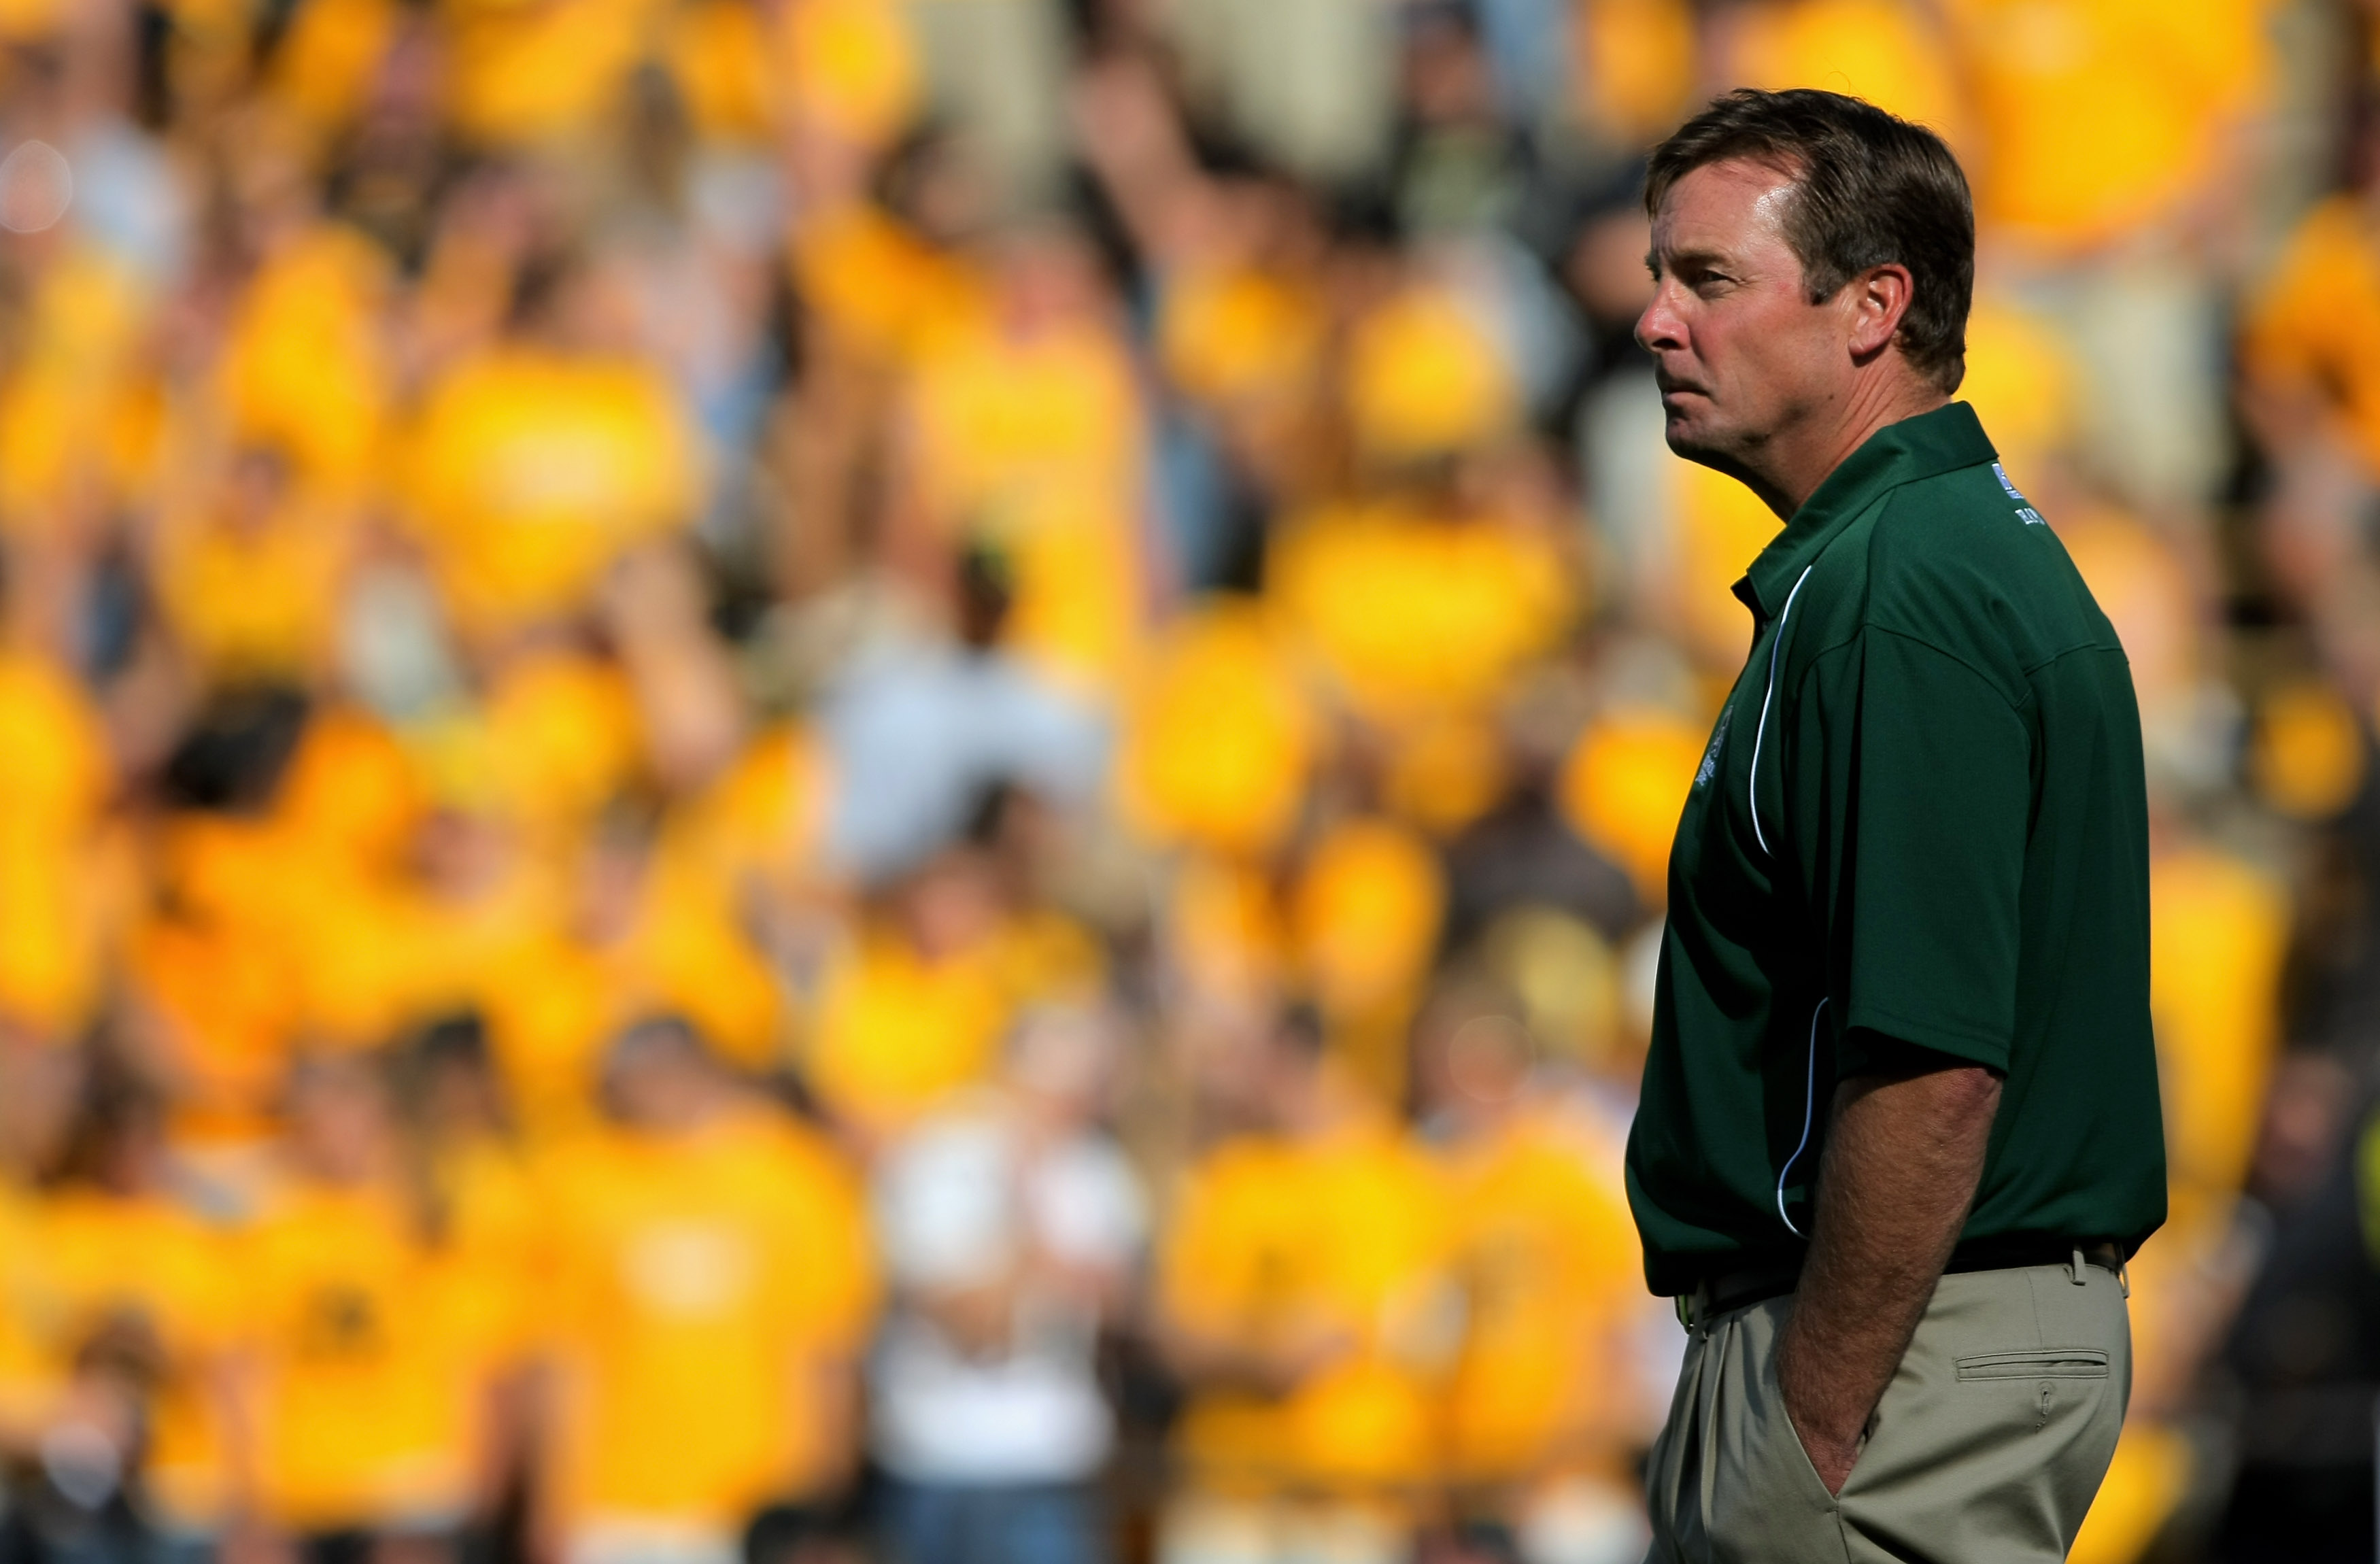 BOULDER, CO - SEPTEMBER 06:  Head coach Steve Fairchild of the Colorado State Rams walks the field during warm ups prior to facing the Colorado Buffaloes at Folsom Field on September 6, 2009 in Boulder, Colorado.  (Photo by Doug Pensinger/Getty Images)